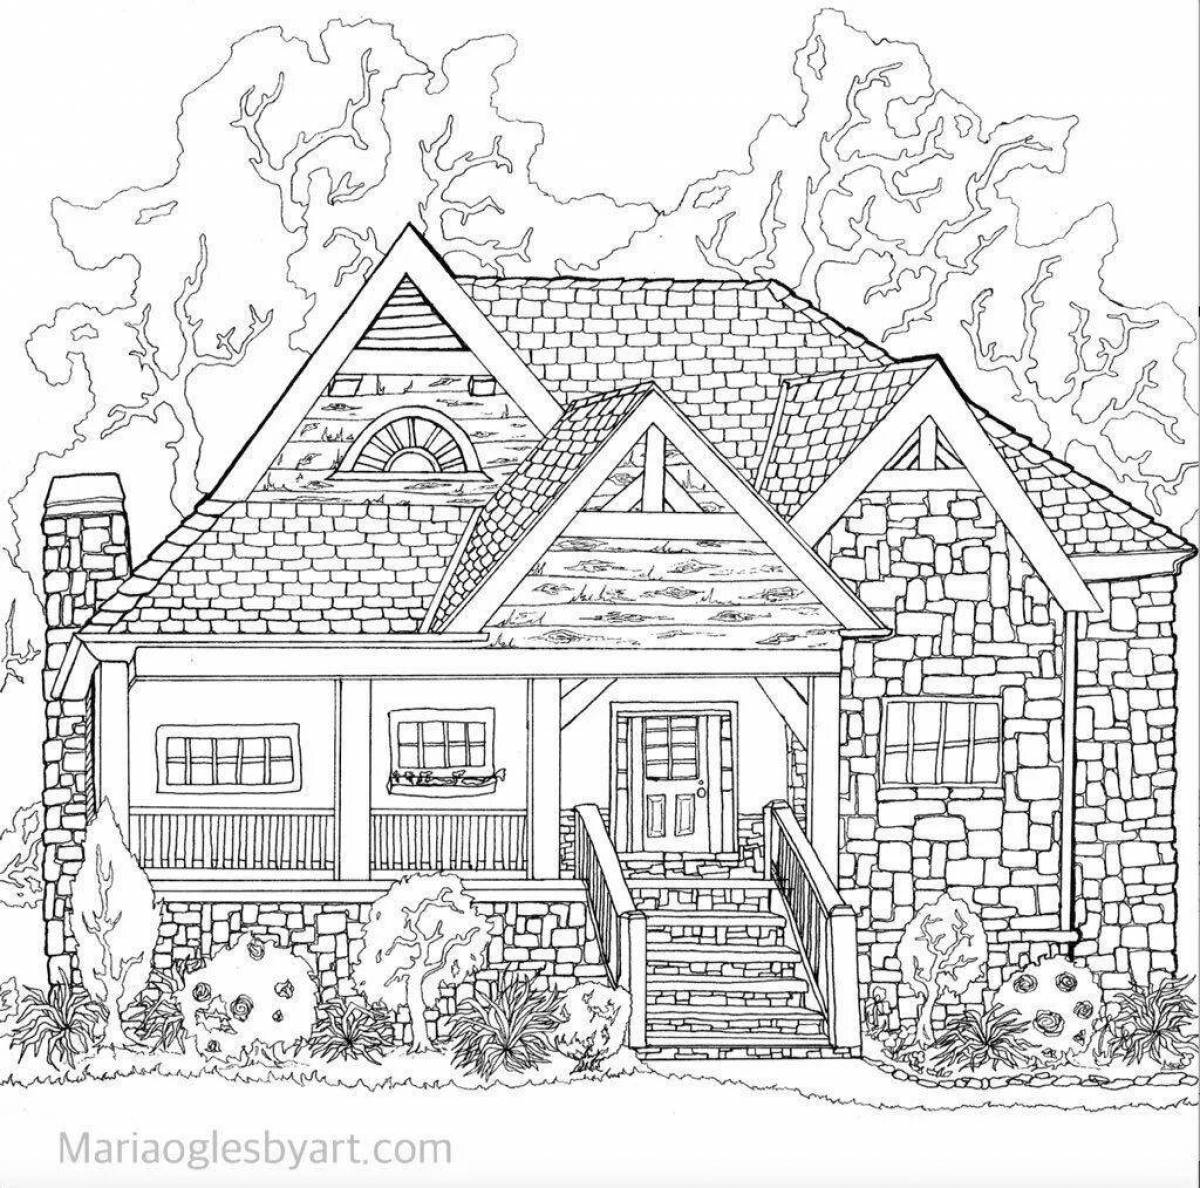 Coloring book flawless beautiful house